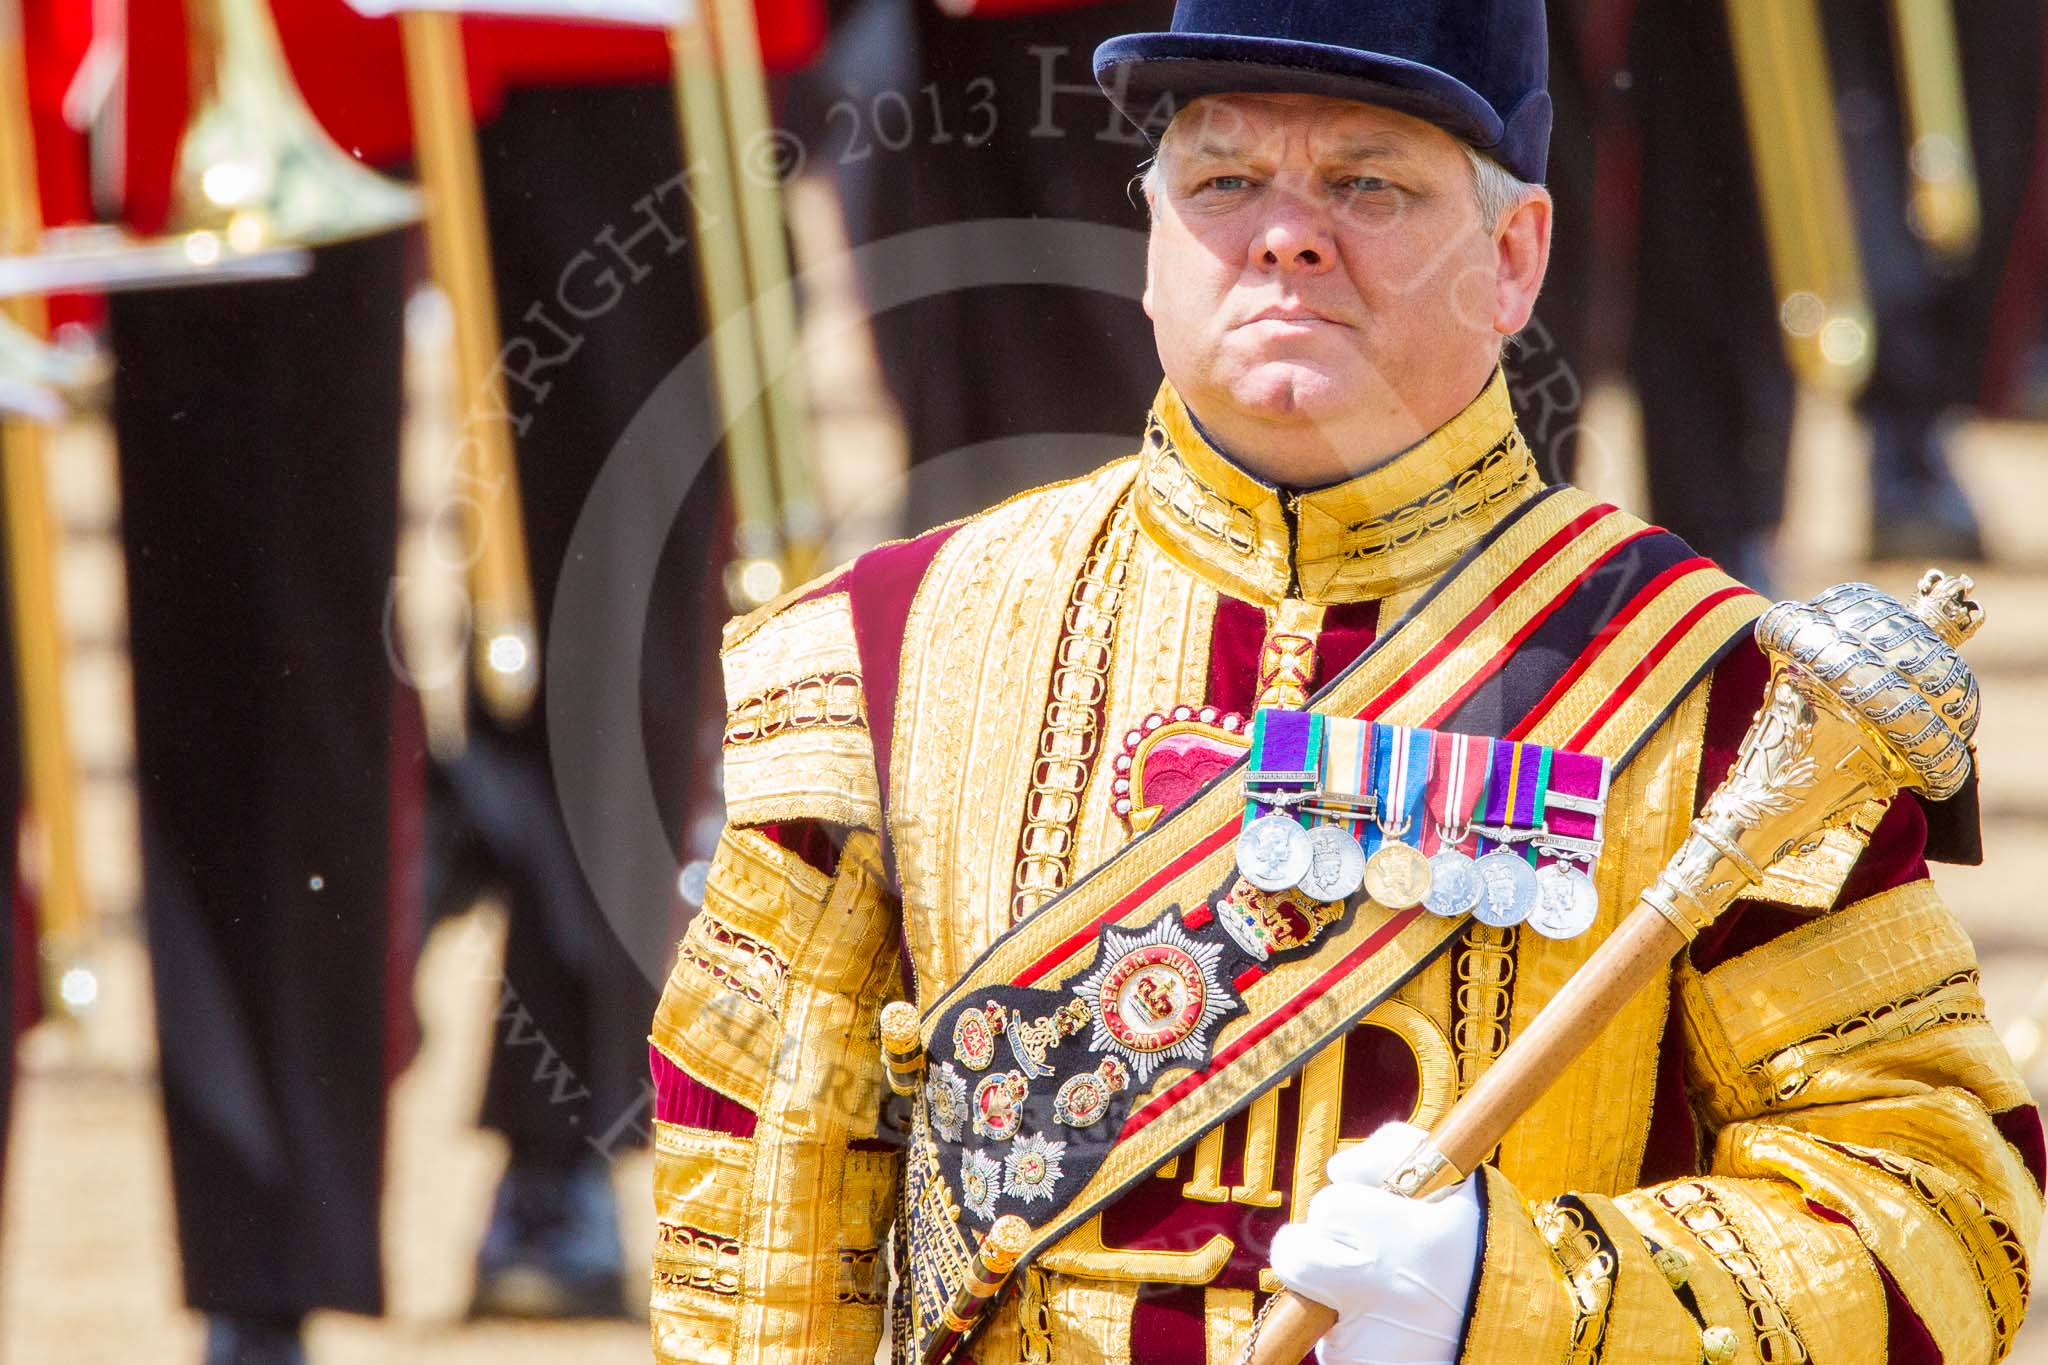 Trooping the Colour 2013: A close-up view of Drum Major Stephen Staite, Grenadier Guards..
Horse Guards Parade, Westminster,
London SW1,

United Kingdom,
on 15 June 2013 at 11:52, image #642